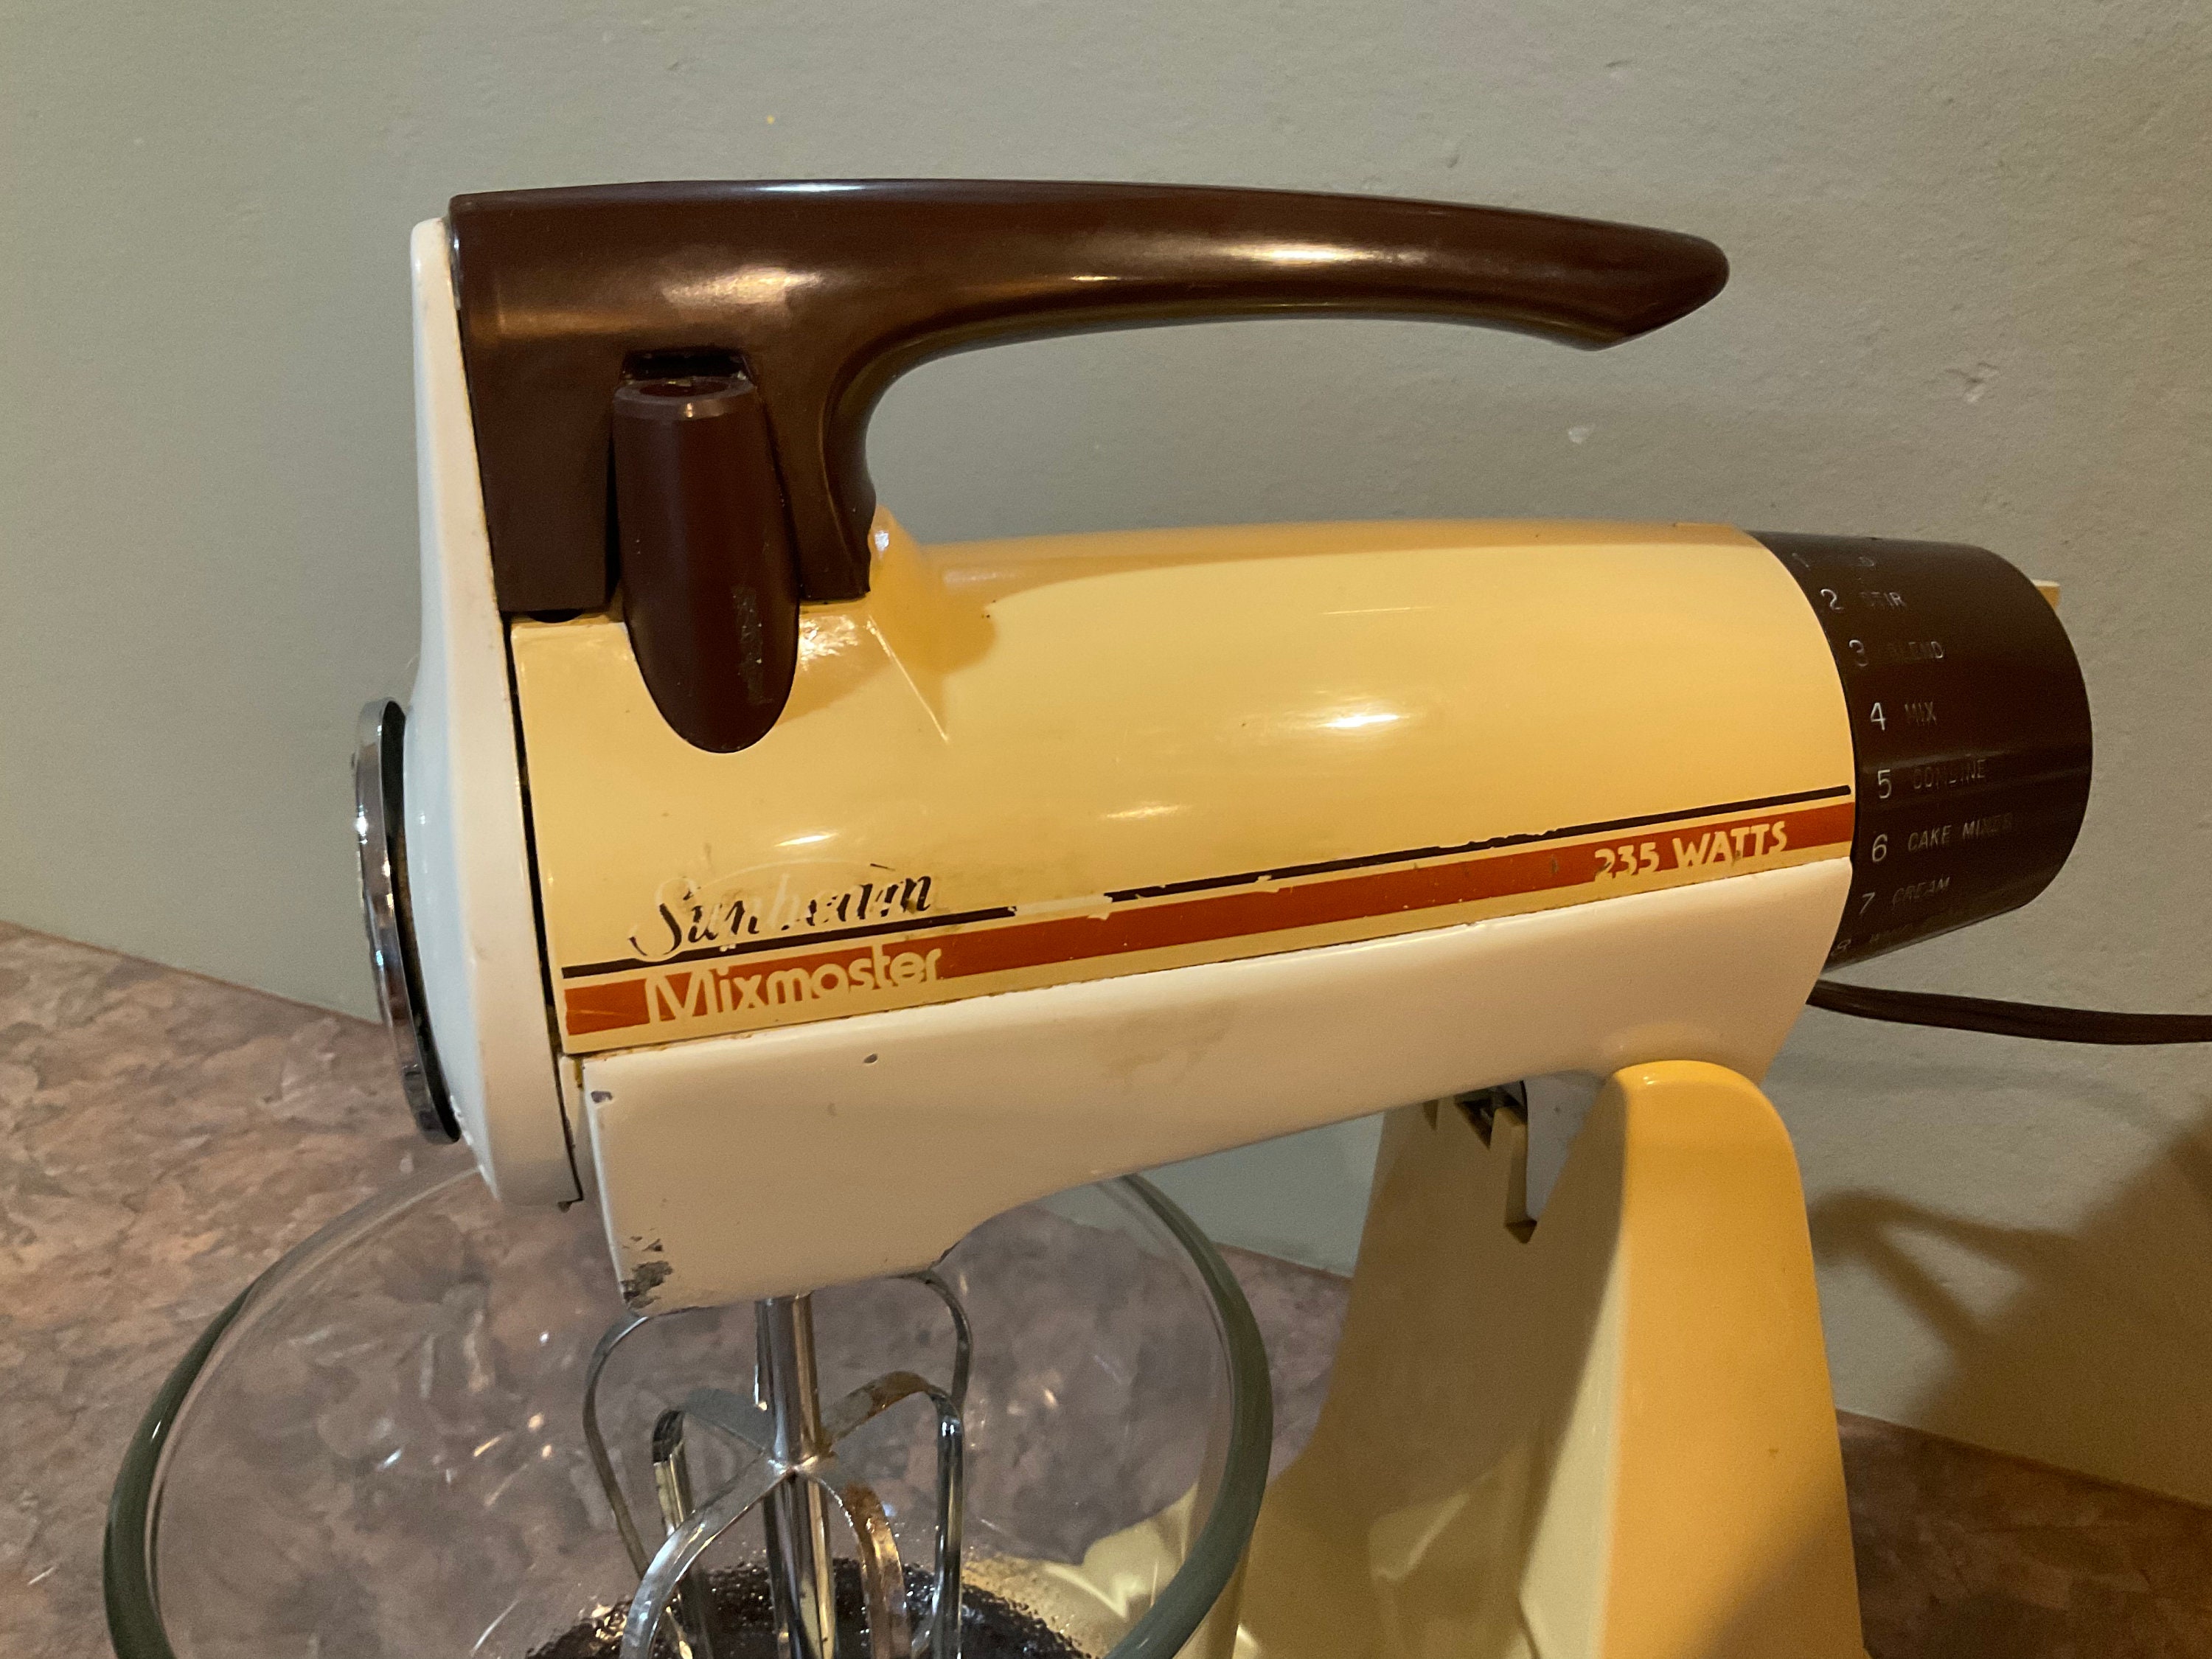 Vintage Electric Stand Mixer / Sunbeam Mixmaster / 5 Speeds With Burst of  Power / Large Mixing Bowl / Almond / Retro Kitchenware, Cookware 